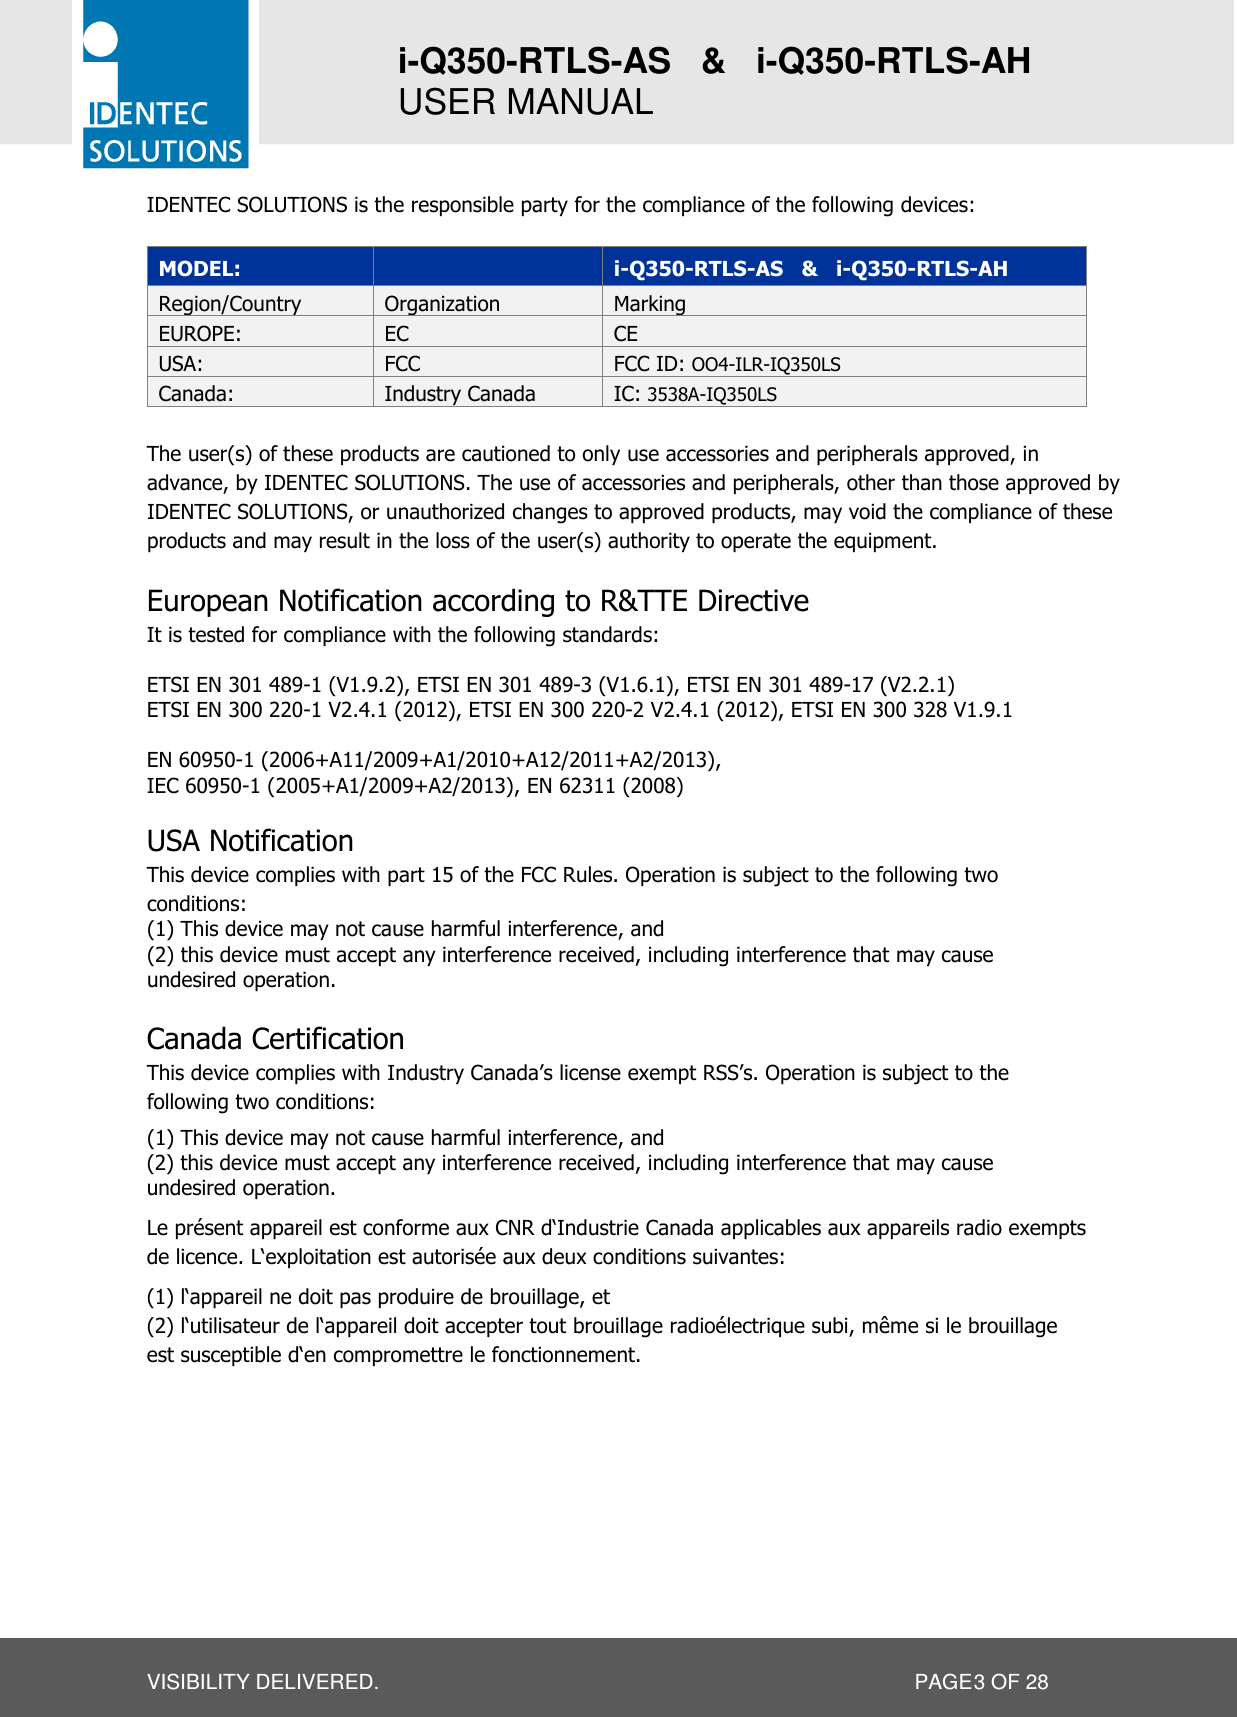 i-Q350-RTLS-AS   &amp;   i-Q350-RTLS-AH   USER MANUAL  VISIBILITY DELIVERED.                   PAGE 3 OF 28 IDENTEC SOLUTIONS is the responsible party for the compliance of the following devices:  MODEL:   i-Q350-RTLS-AS   &amp;   i-Q350-RTLS-AH Region/Country  Organization  Marking EUROPE:  EC  CE USA:  FCC  FCC ID: OO4-ILR-IQ350LS Canada:  Industry Canada  IC: 3538A-IQ350LS  The user(s) of these products are cautioned to only use accessories and peripherals approved, in advance, by IDENTEC SOLUTIONS. The use of accessories and peripherals, other than those approved by IDENTEC SOLUTIONS, or unauthorized changes to approved products, may void the compliance of these products and may result in the loss of the user(s) authority to operate the equipment.  European Notification according to R&amp;TTE Directive It is tested for compliance with the following standards:   ETSI EN 301 489-1 (V1.9.2), ETSI EN 301 489-3 (V1.6.1), ETSI EN 301 489-17 (V2.2.1) ETSI EN 300 220-1 V2.4.1 (2012), ETSI EN 300 220-2 V2.4.1 (2012), ETSI EN 300 328 V1.9.1  EN 60950-1 (2006+A11/2009+A1/2010+A12/2011+A2/2013),  IEC 60950-1 (2005+A1/2009+A2/2013), EN 62311 (2008)  USA Notification This device complies with part 15 of the FCC Rules. Operation is subject to the following two conditions:  (1) This device may not cause harmful interference, and  (2) this device must accept any interference received, including interference that may cause undesired operation.  Canada Certification This device complies with Industry Canada’s license exempt RSS’s. Operation is subject to the following two conditions:  (1) This device may not cause harmful interference, and  (2) this device must accept any interference received, including interference that may cause undesired operation. Le présent appareil est conforme aux CNR d‘Industrie Canada applicables aux appareils radio exempts de licence. L‘exploitation est autorisée aux deux conditions suivantes: (1) l‘appareil ne doit pas produire de brouillage, et (2) l‘utilisateur de l‘appareil doit accepter tout brouillage radioélectrique subi, même si le brouillage est susceptible d‘en compromettre le fonctionnement.    